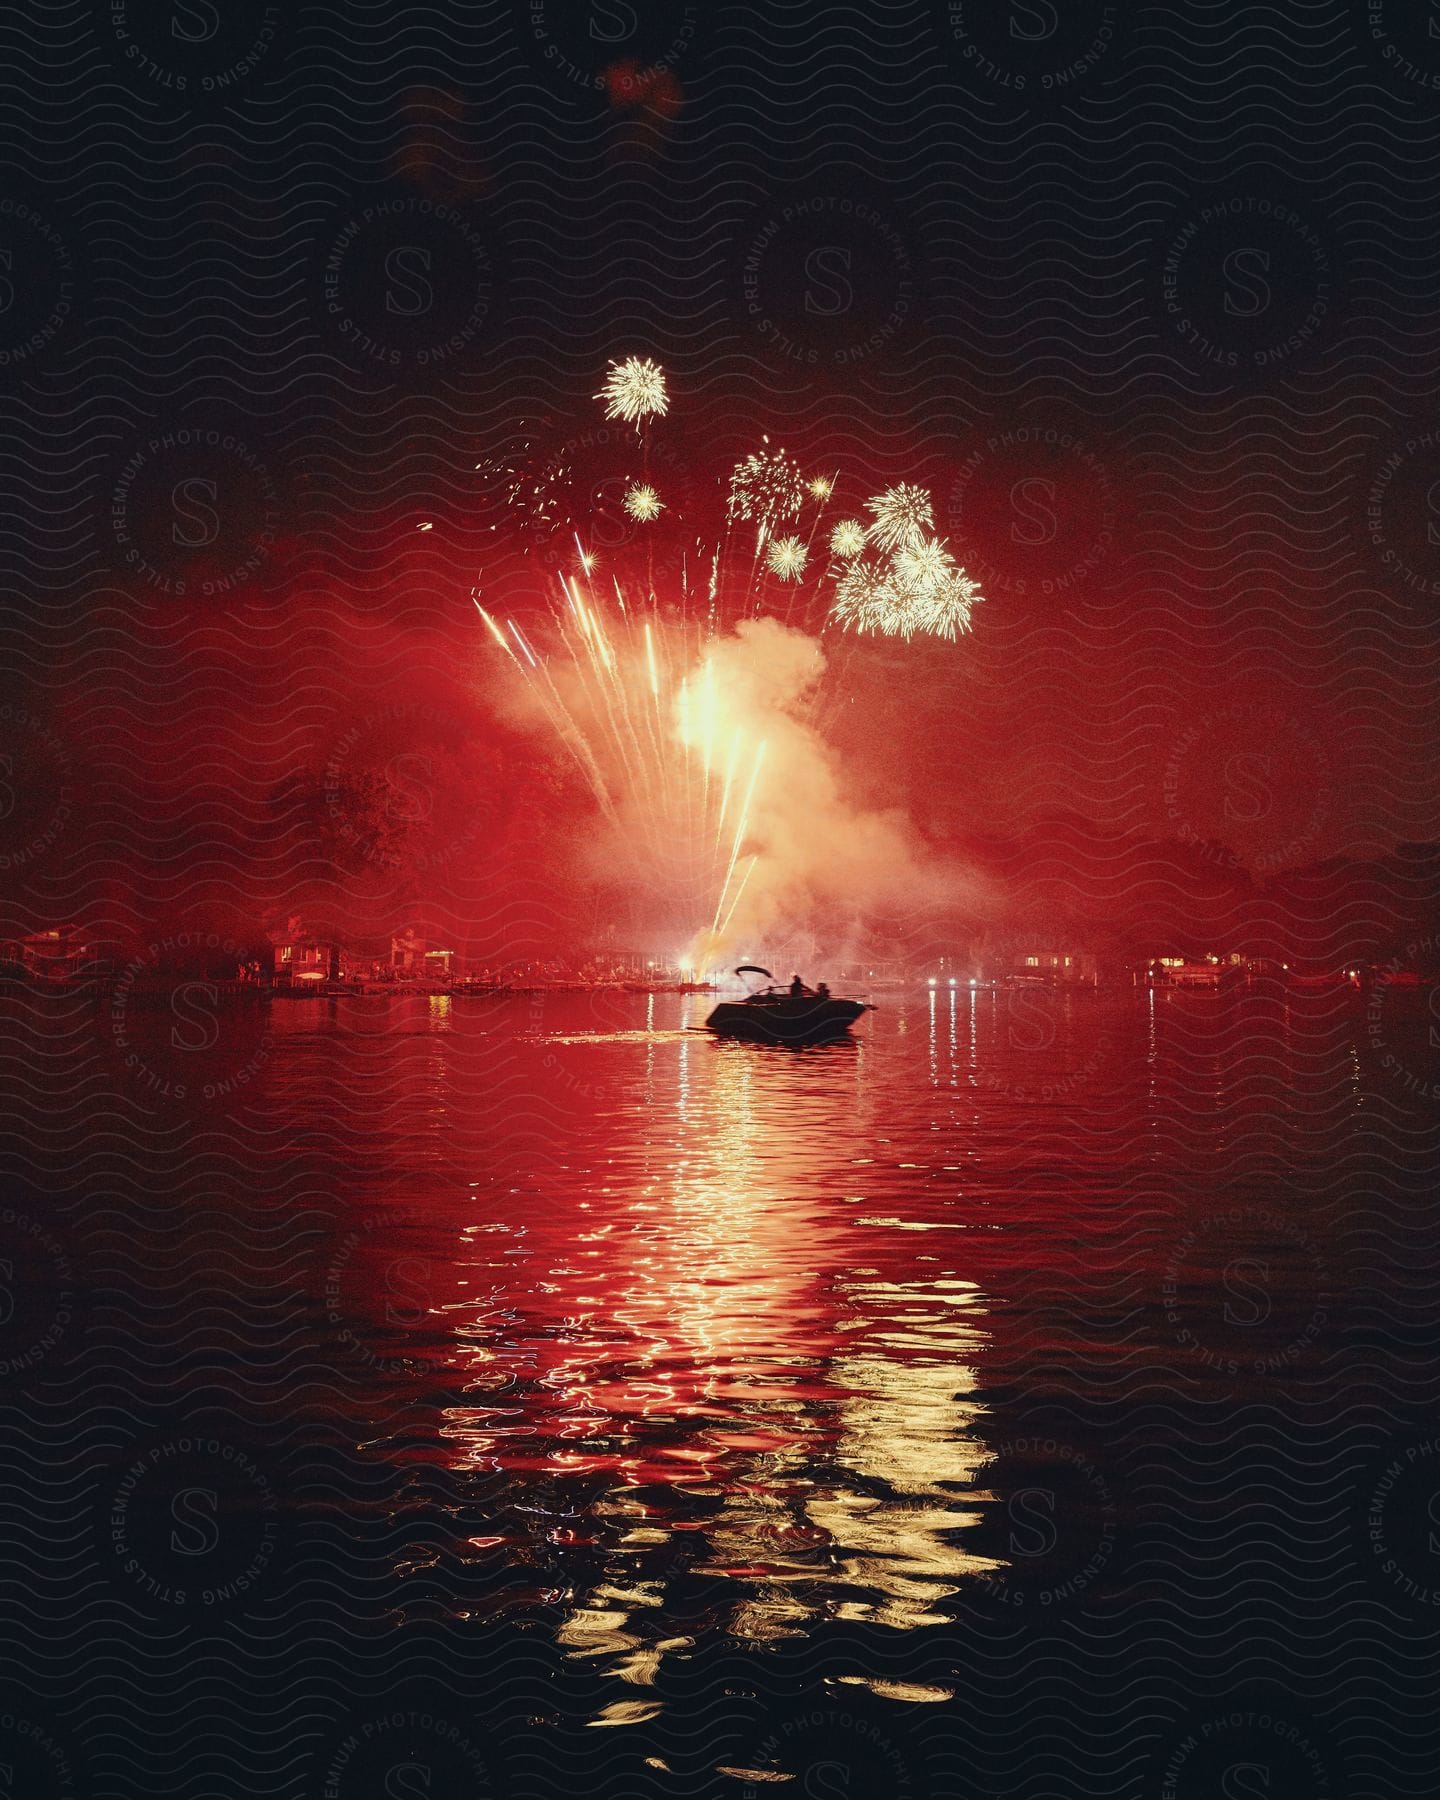 A boat on the water at night with red fireworks in the background